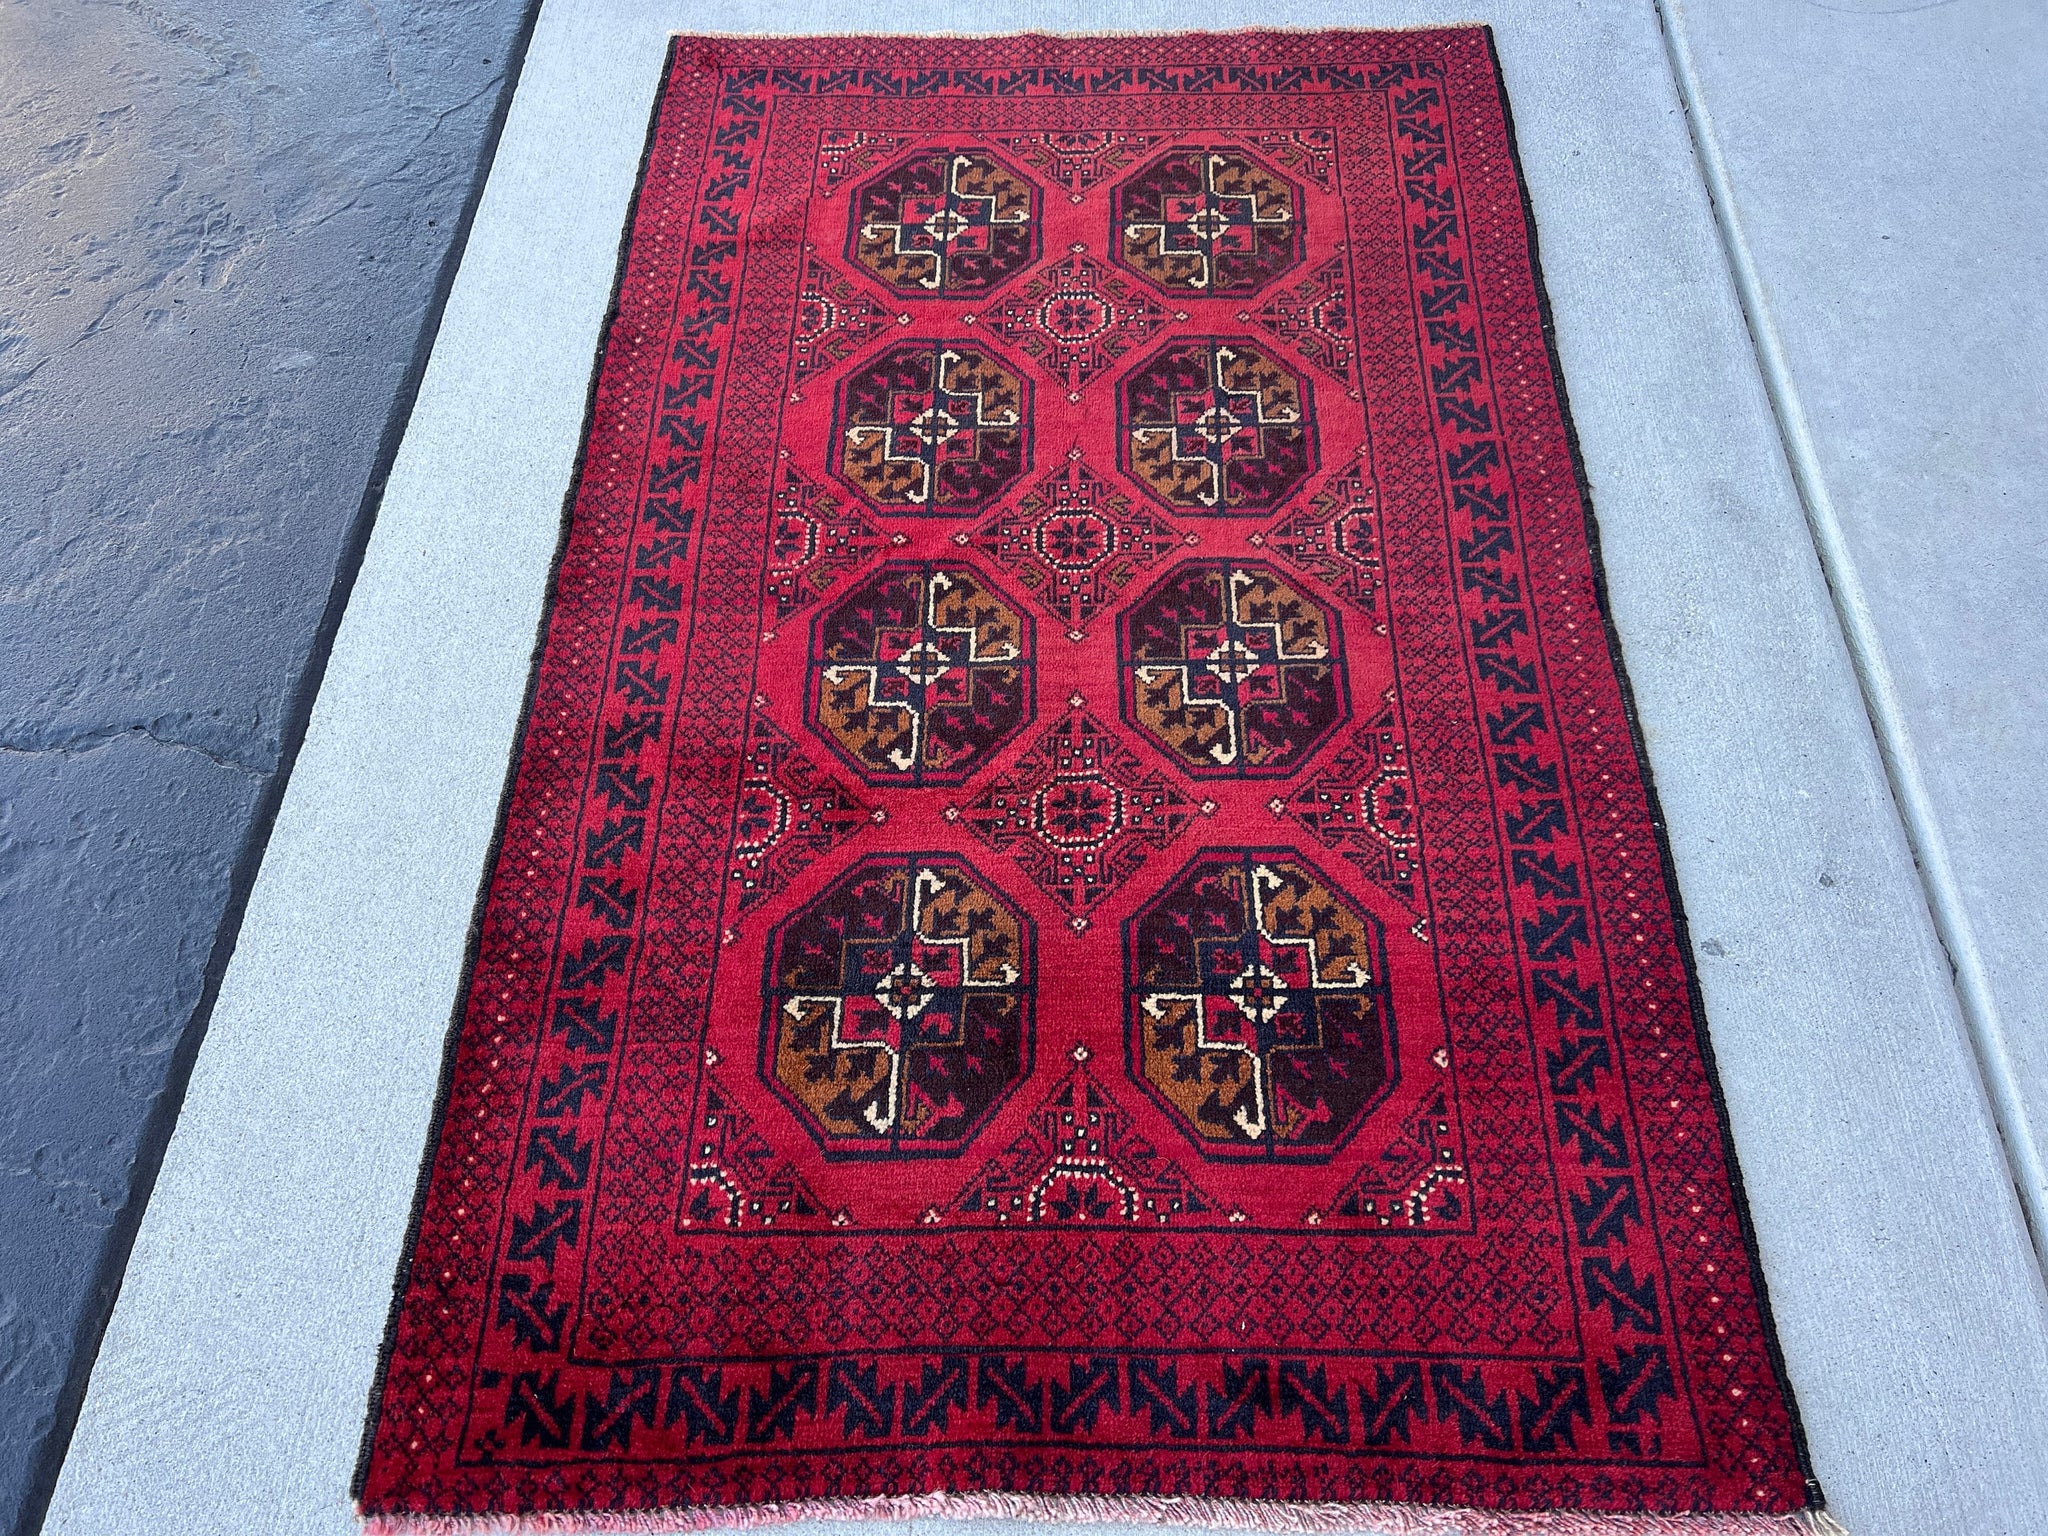 3x5 (100x180) Handmade Vintage Baluch Afghan Rug | Brick Red Taupe Midnight Blue Wine Red Ivory Black | Hand Knotted Geometric Turkish Wool